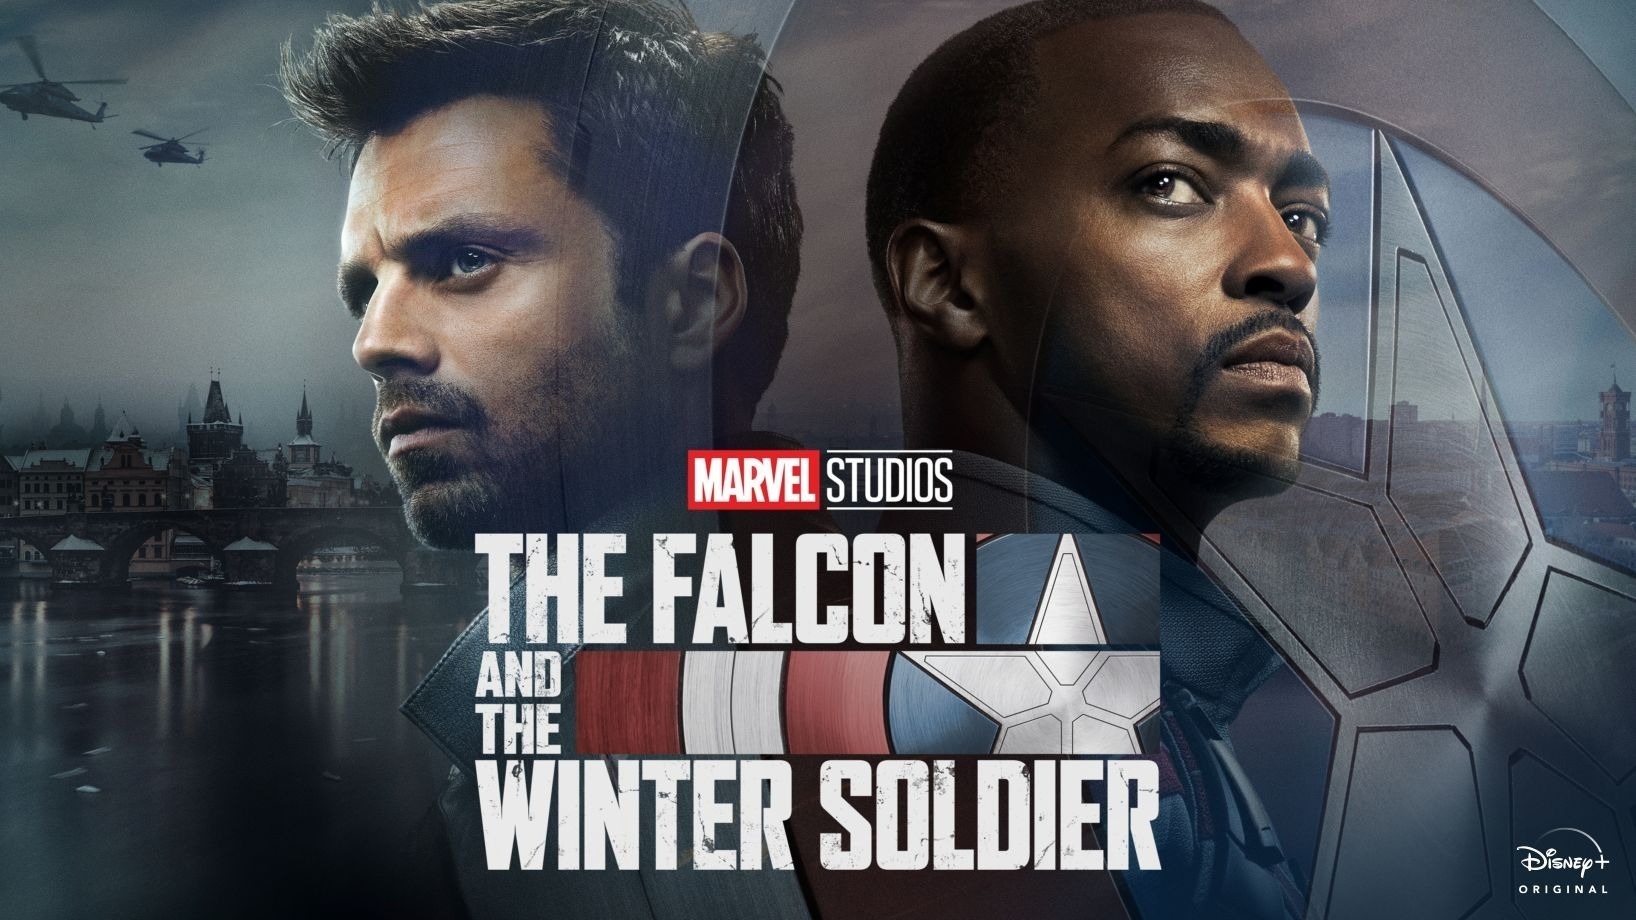 The Falcon and the Winter Soldier